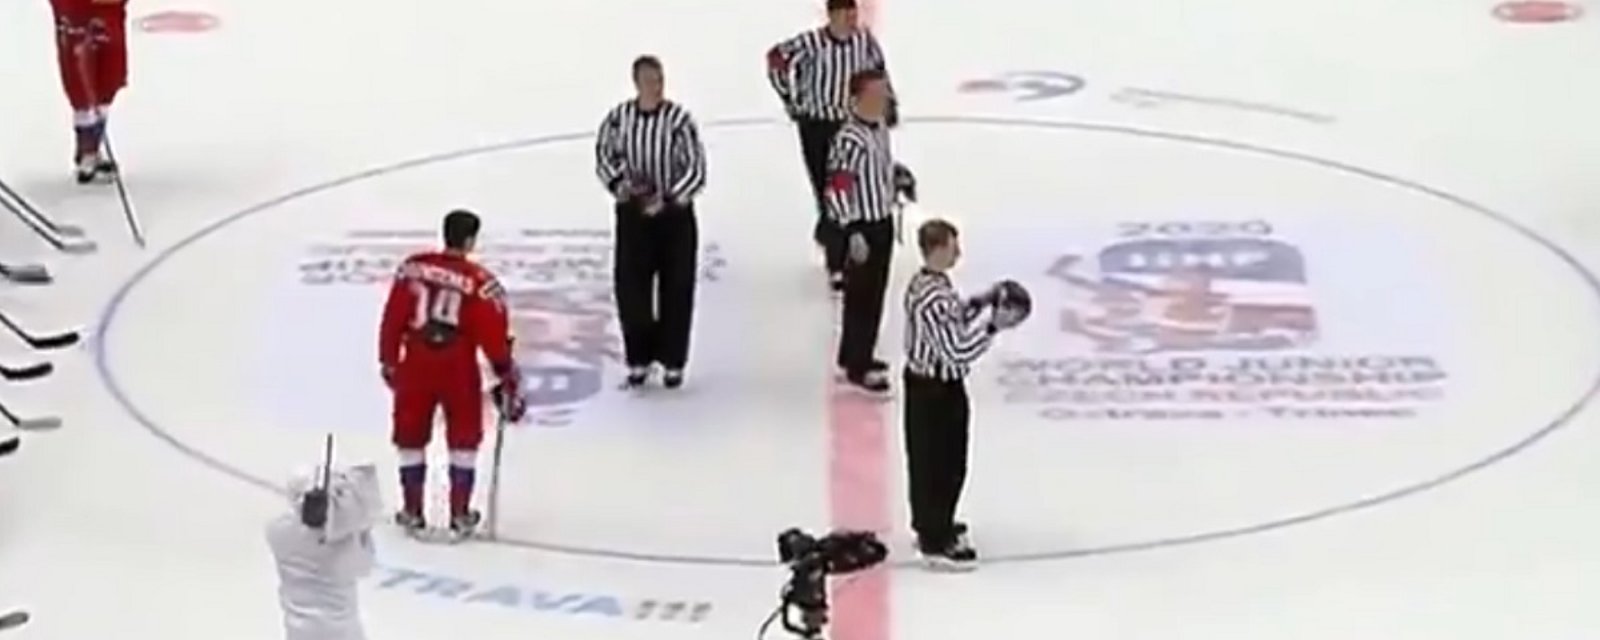 Canada's captain disrespects the Russian Anthem at the World Juniors.